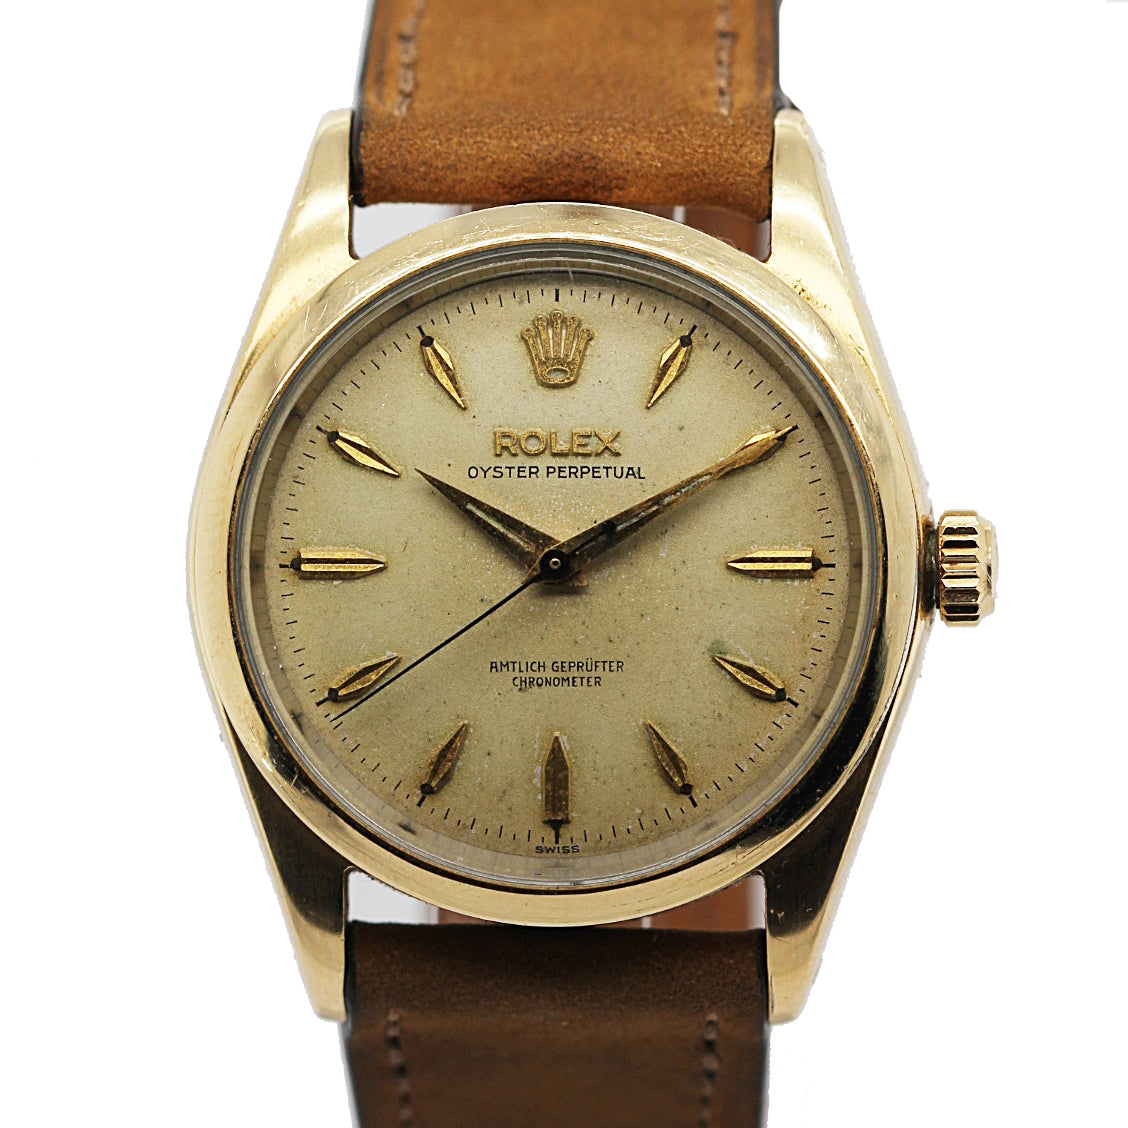 ROLEX<br> Oyster Perpetual Ref.6634 Officially certified chronometer 